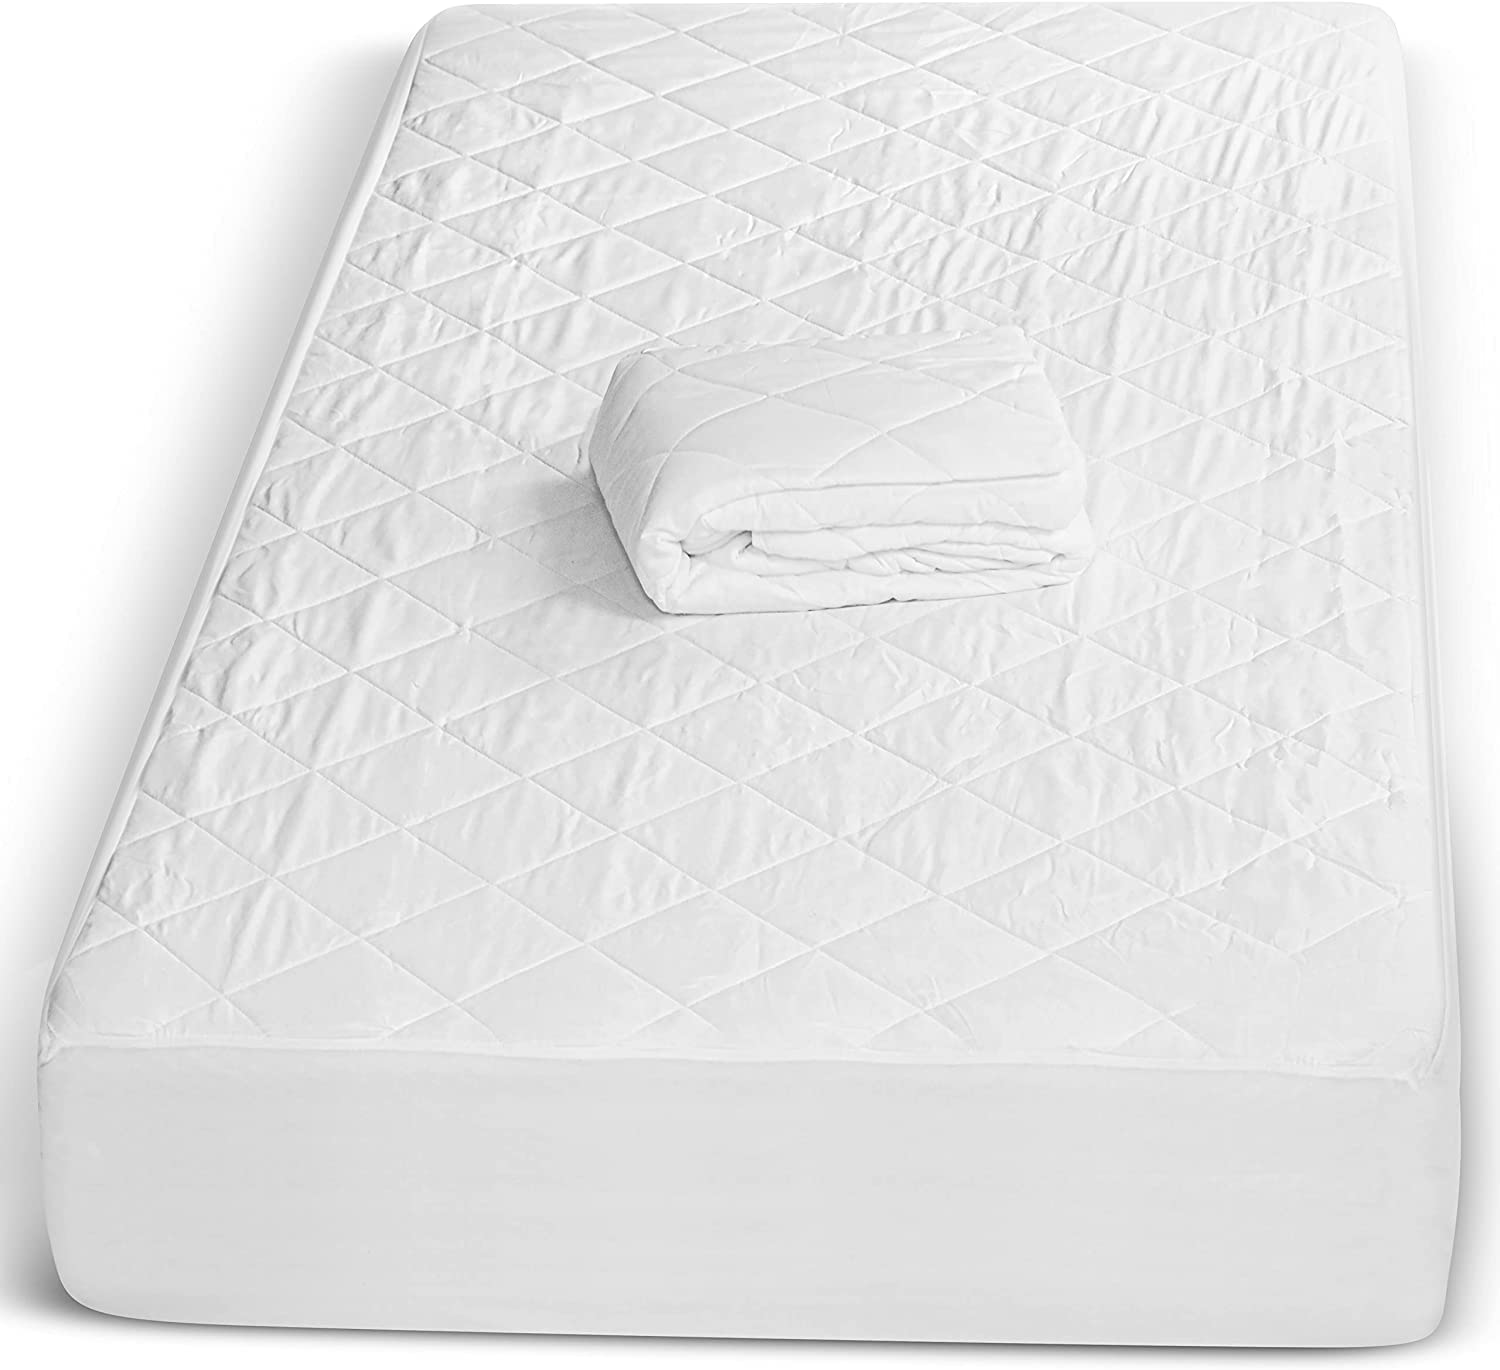 IMFAA Quilted King Mattress Protector - Extra Deep 40 Cm Stretch Skirt – King (152x200) Cm Mattress Topper – Anti Allergy and Breathable Fitted Mattress Cover - Not Waterproof. (King(152x200and40) Cm)